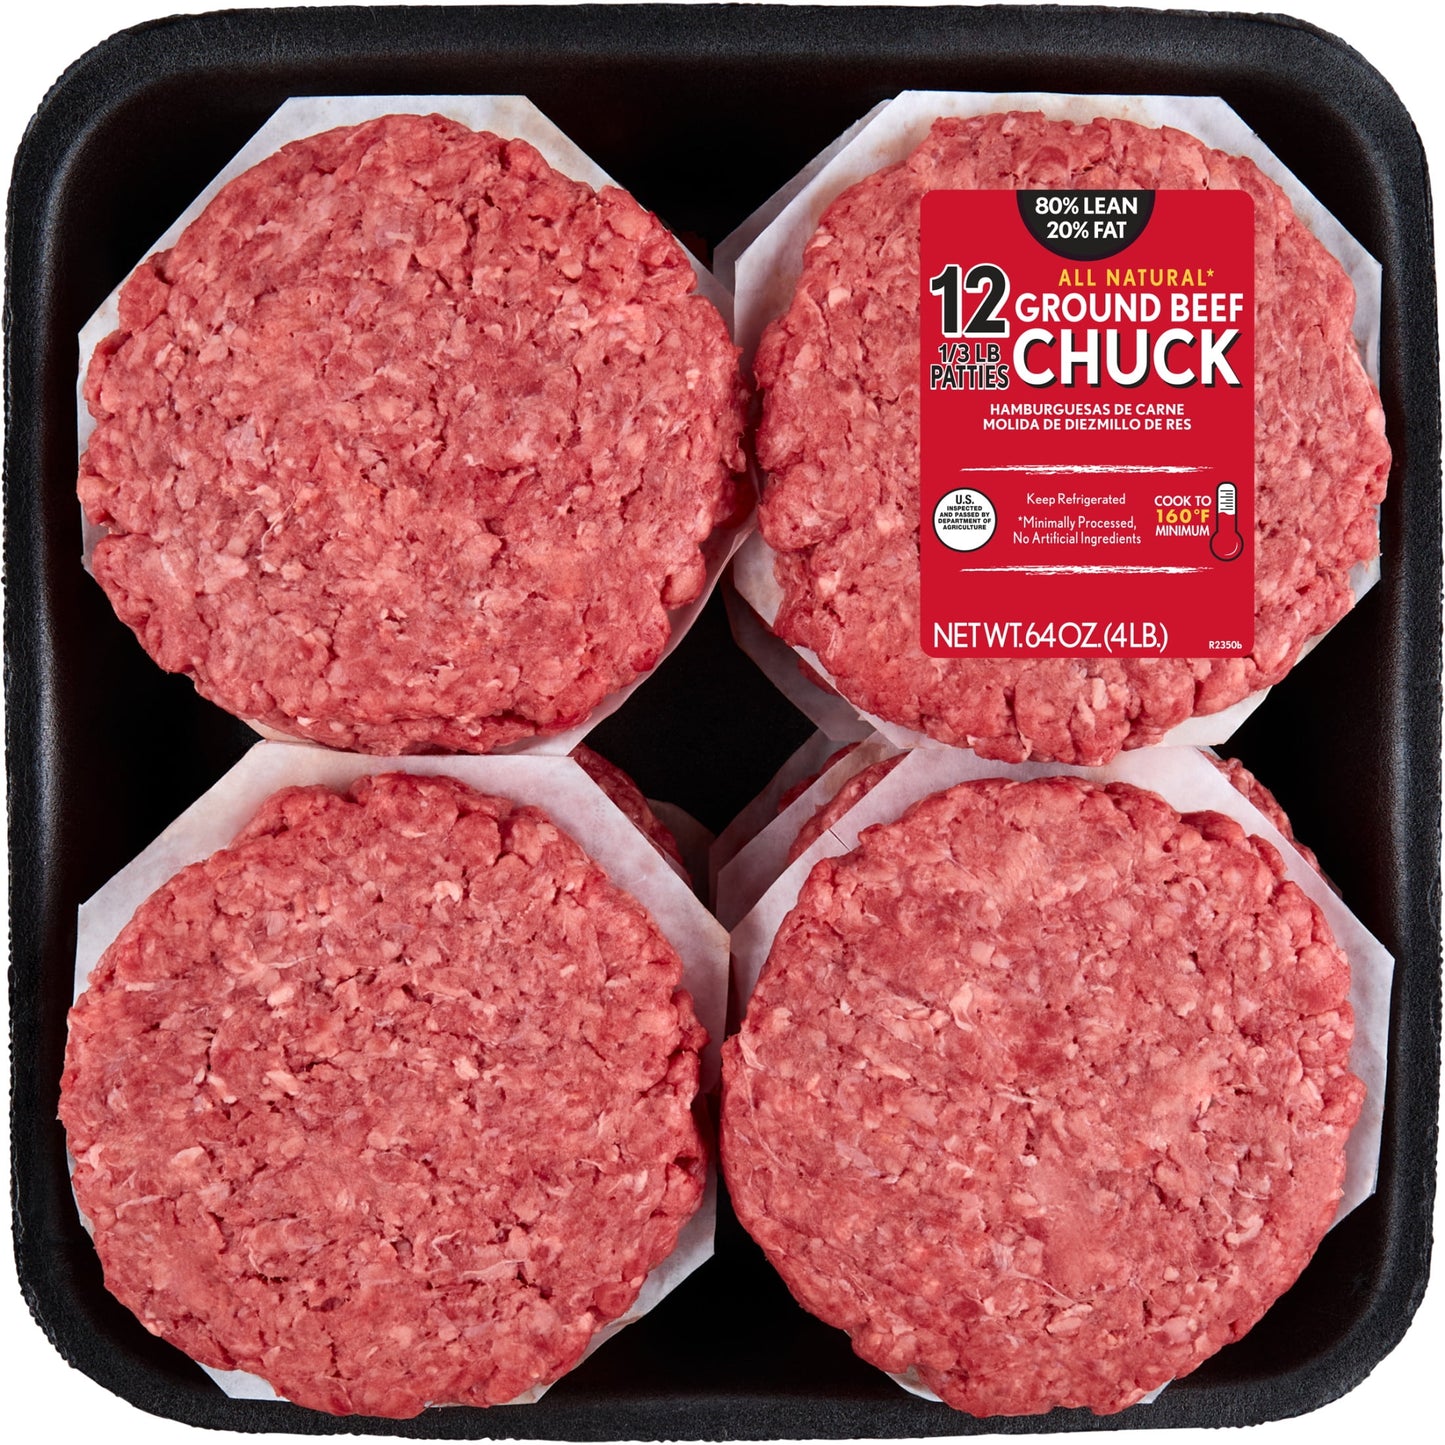 All Natural* 80% Lean/20% Fat Ground Beef Chuck Patties, 12 Count, 4 lb Tray